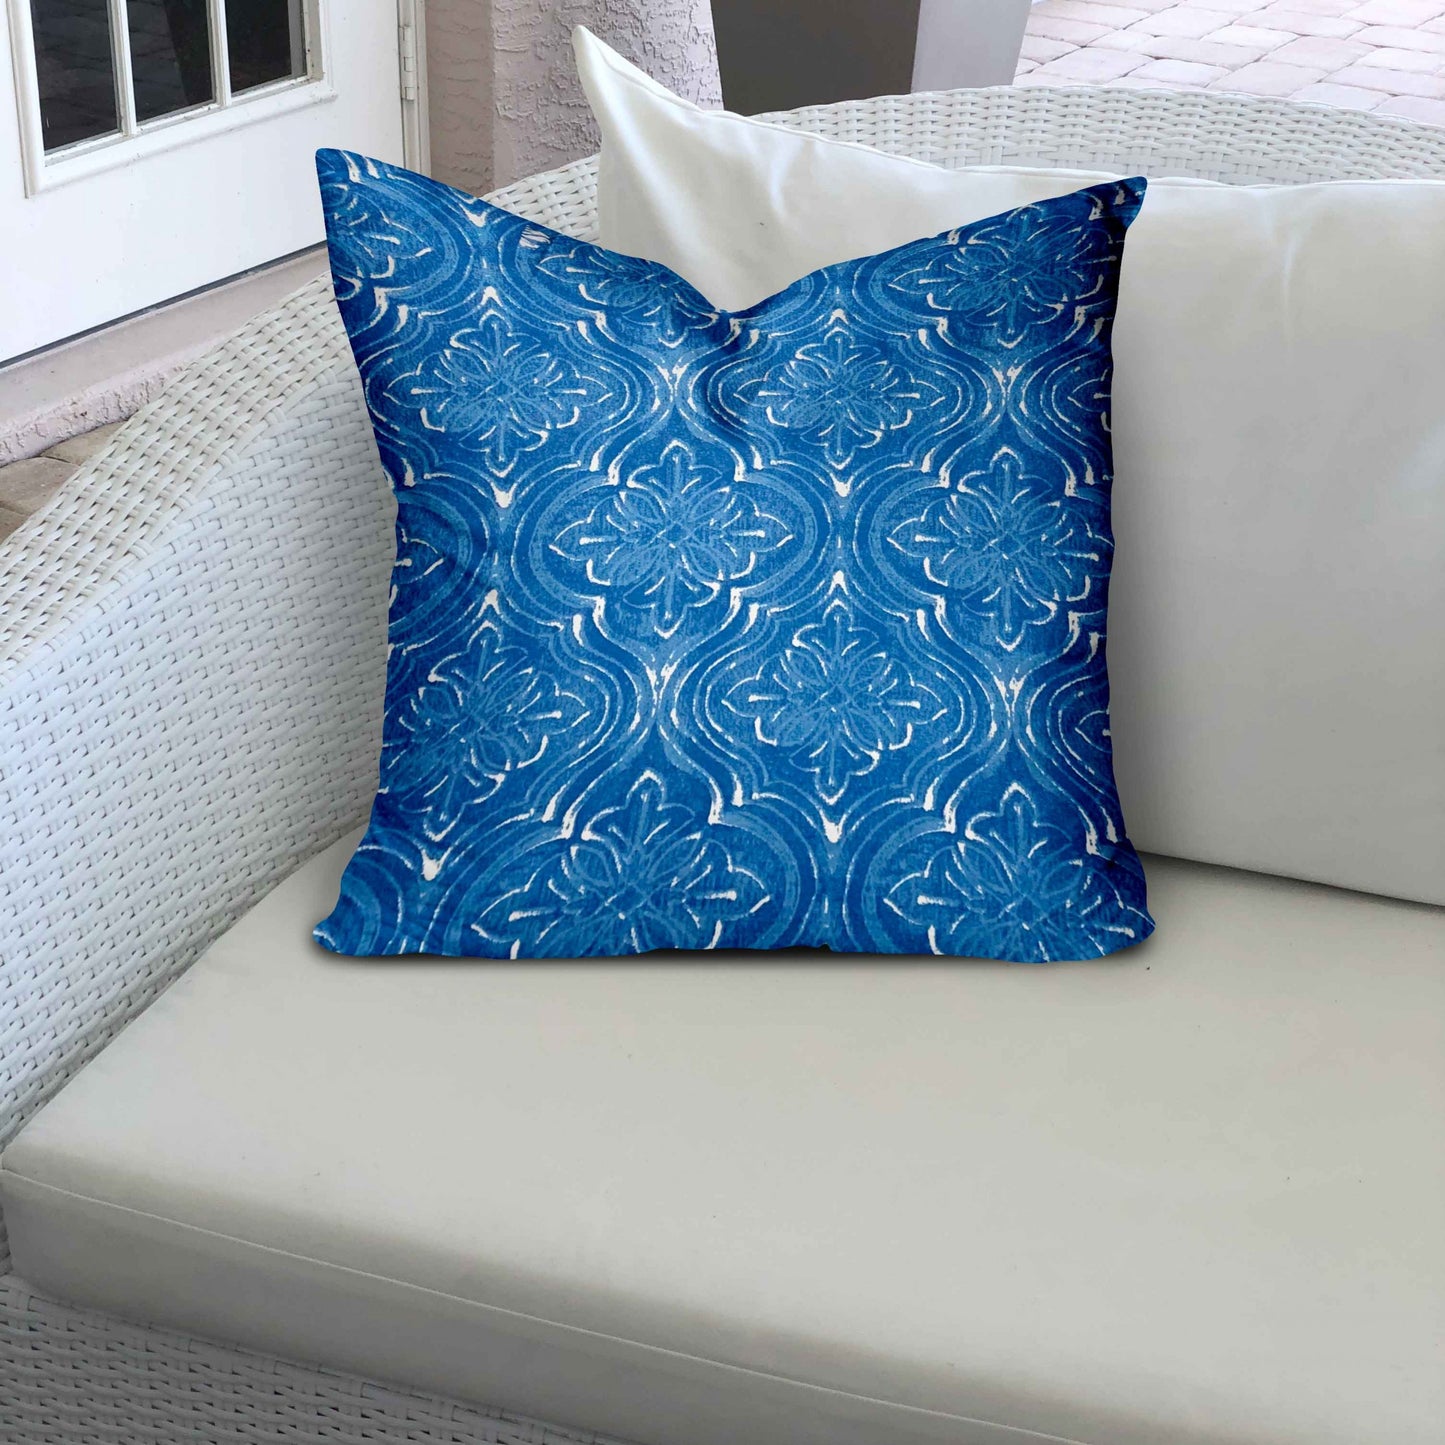 20" X 20" Blue And White Zippered Ikat Throw Indoor Outdoor Pillow Cover